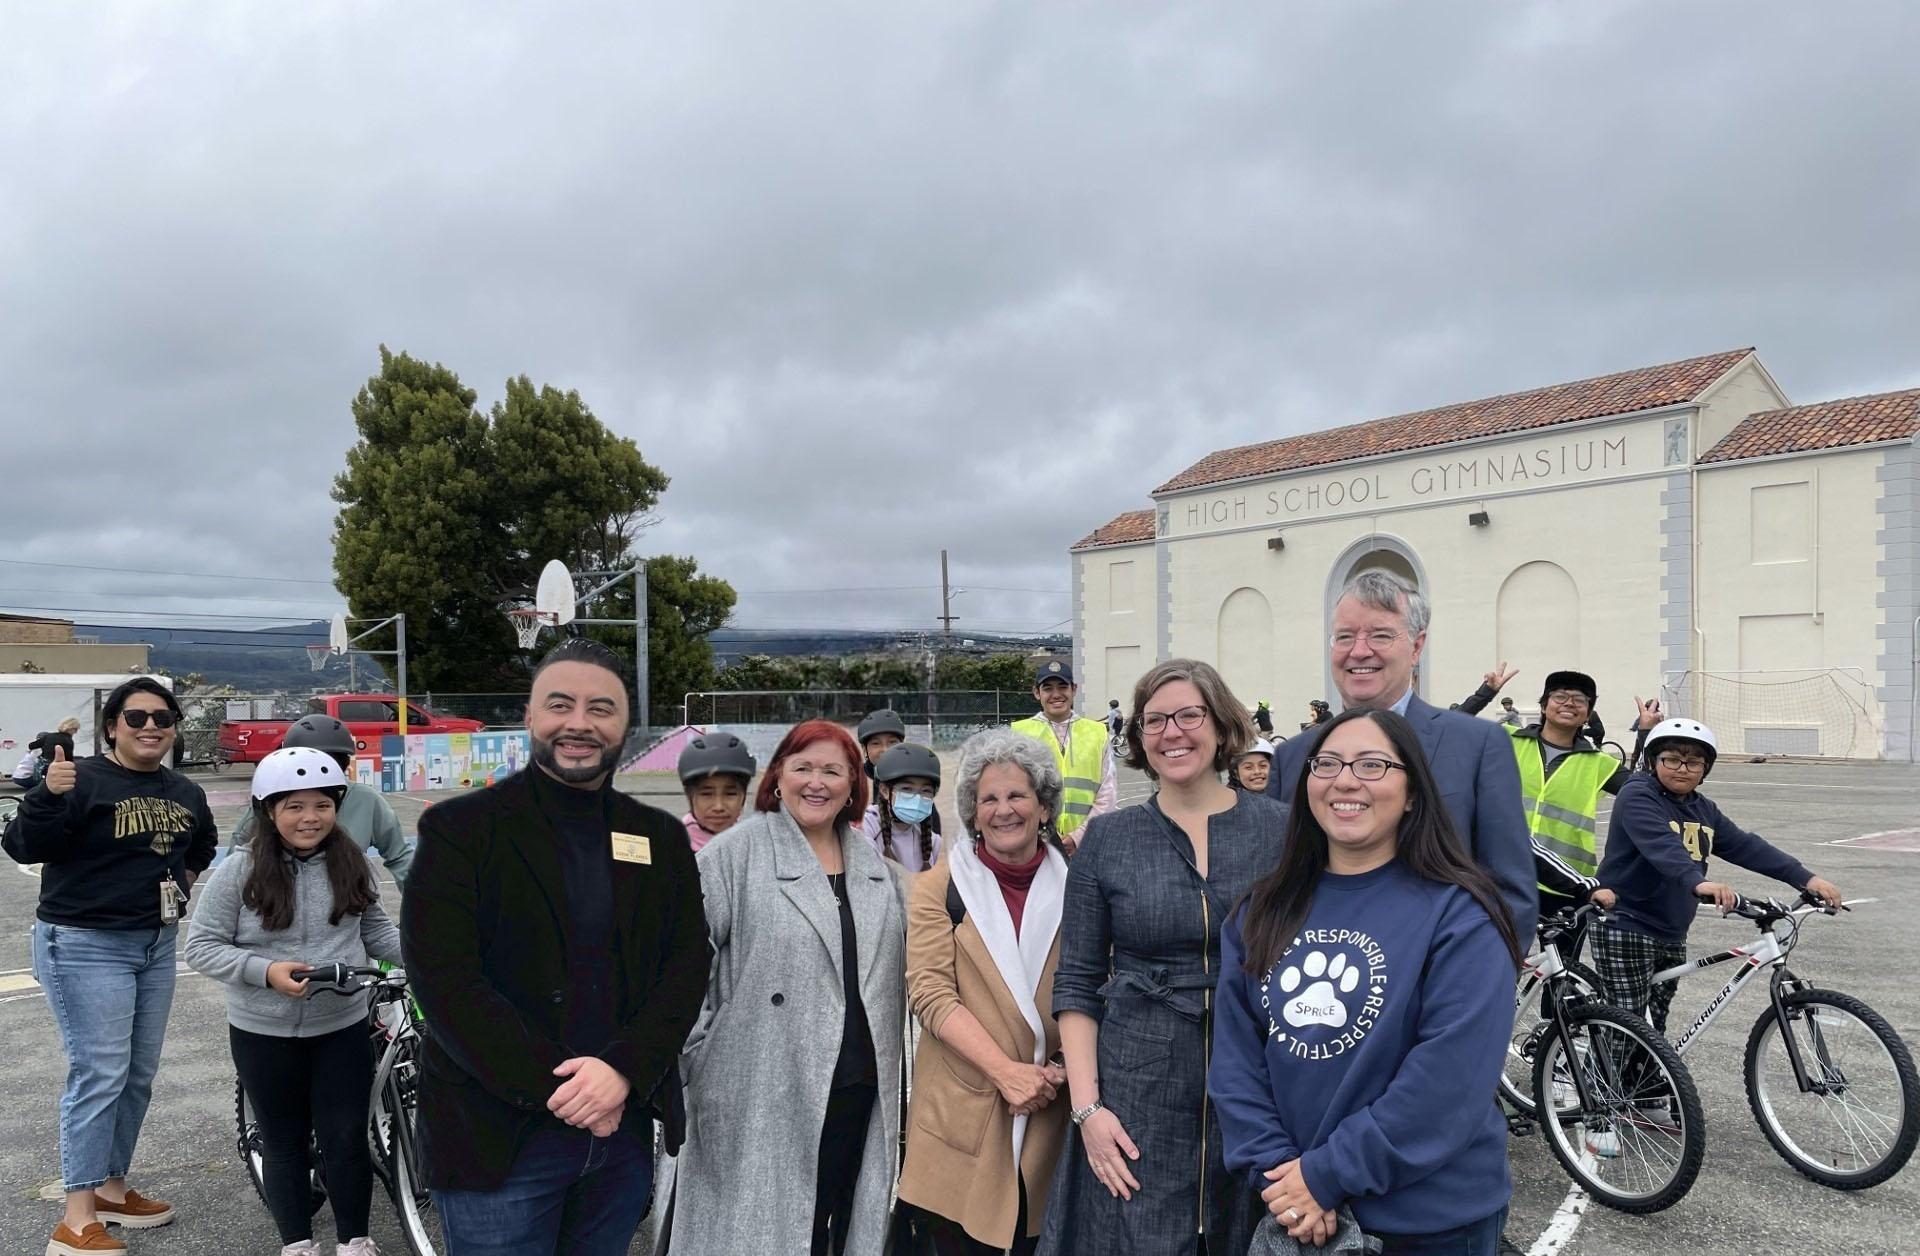 South San Francisco City Council Member Eddie Flores, SSFUSD School Board Member Patricia Murray, South San Francisco City Manager Sharon Ranals, SSFUSD School Board Member Amanda Anthony, and Spruce Elementary School Principal Angelica Garduno at the "Every Kid Deserves a Bike" distribution event on May 26, 2023.